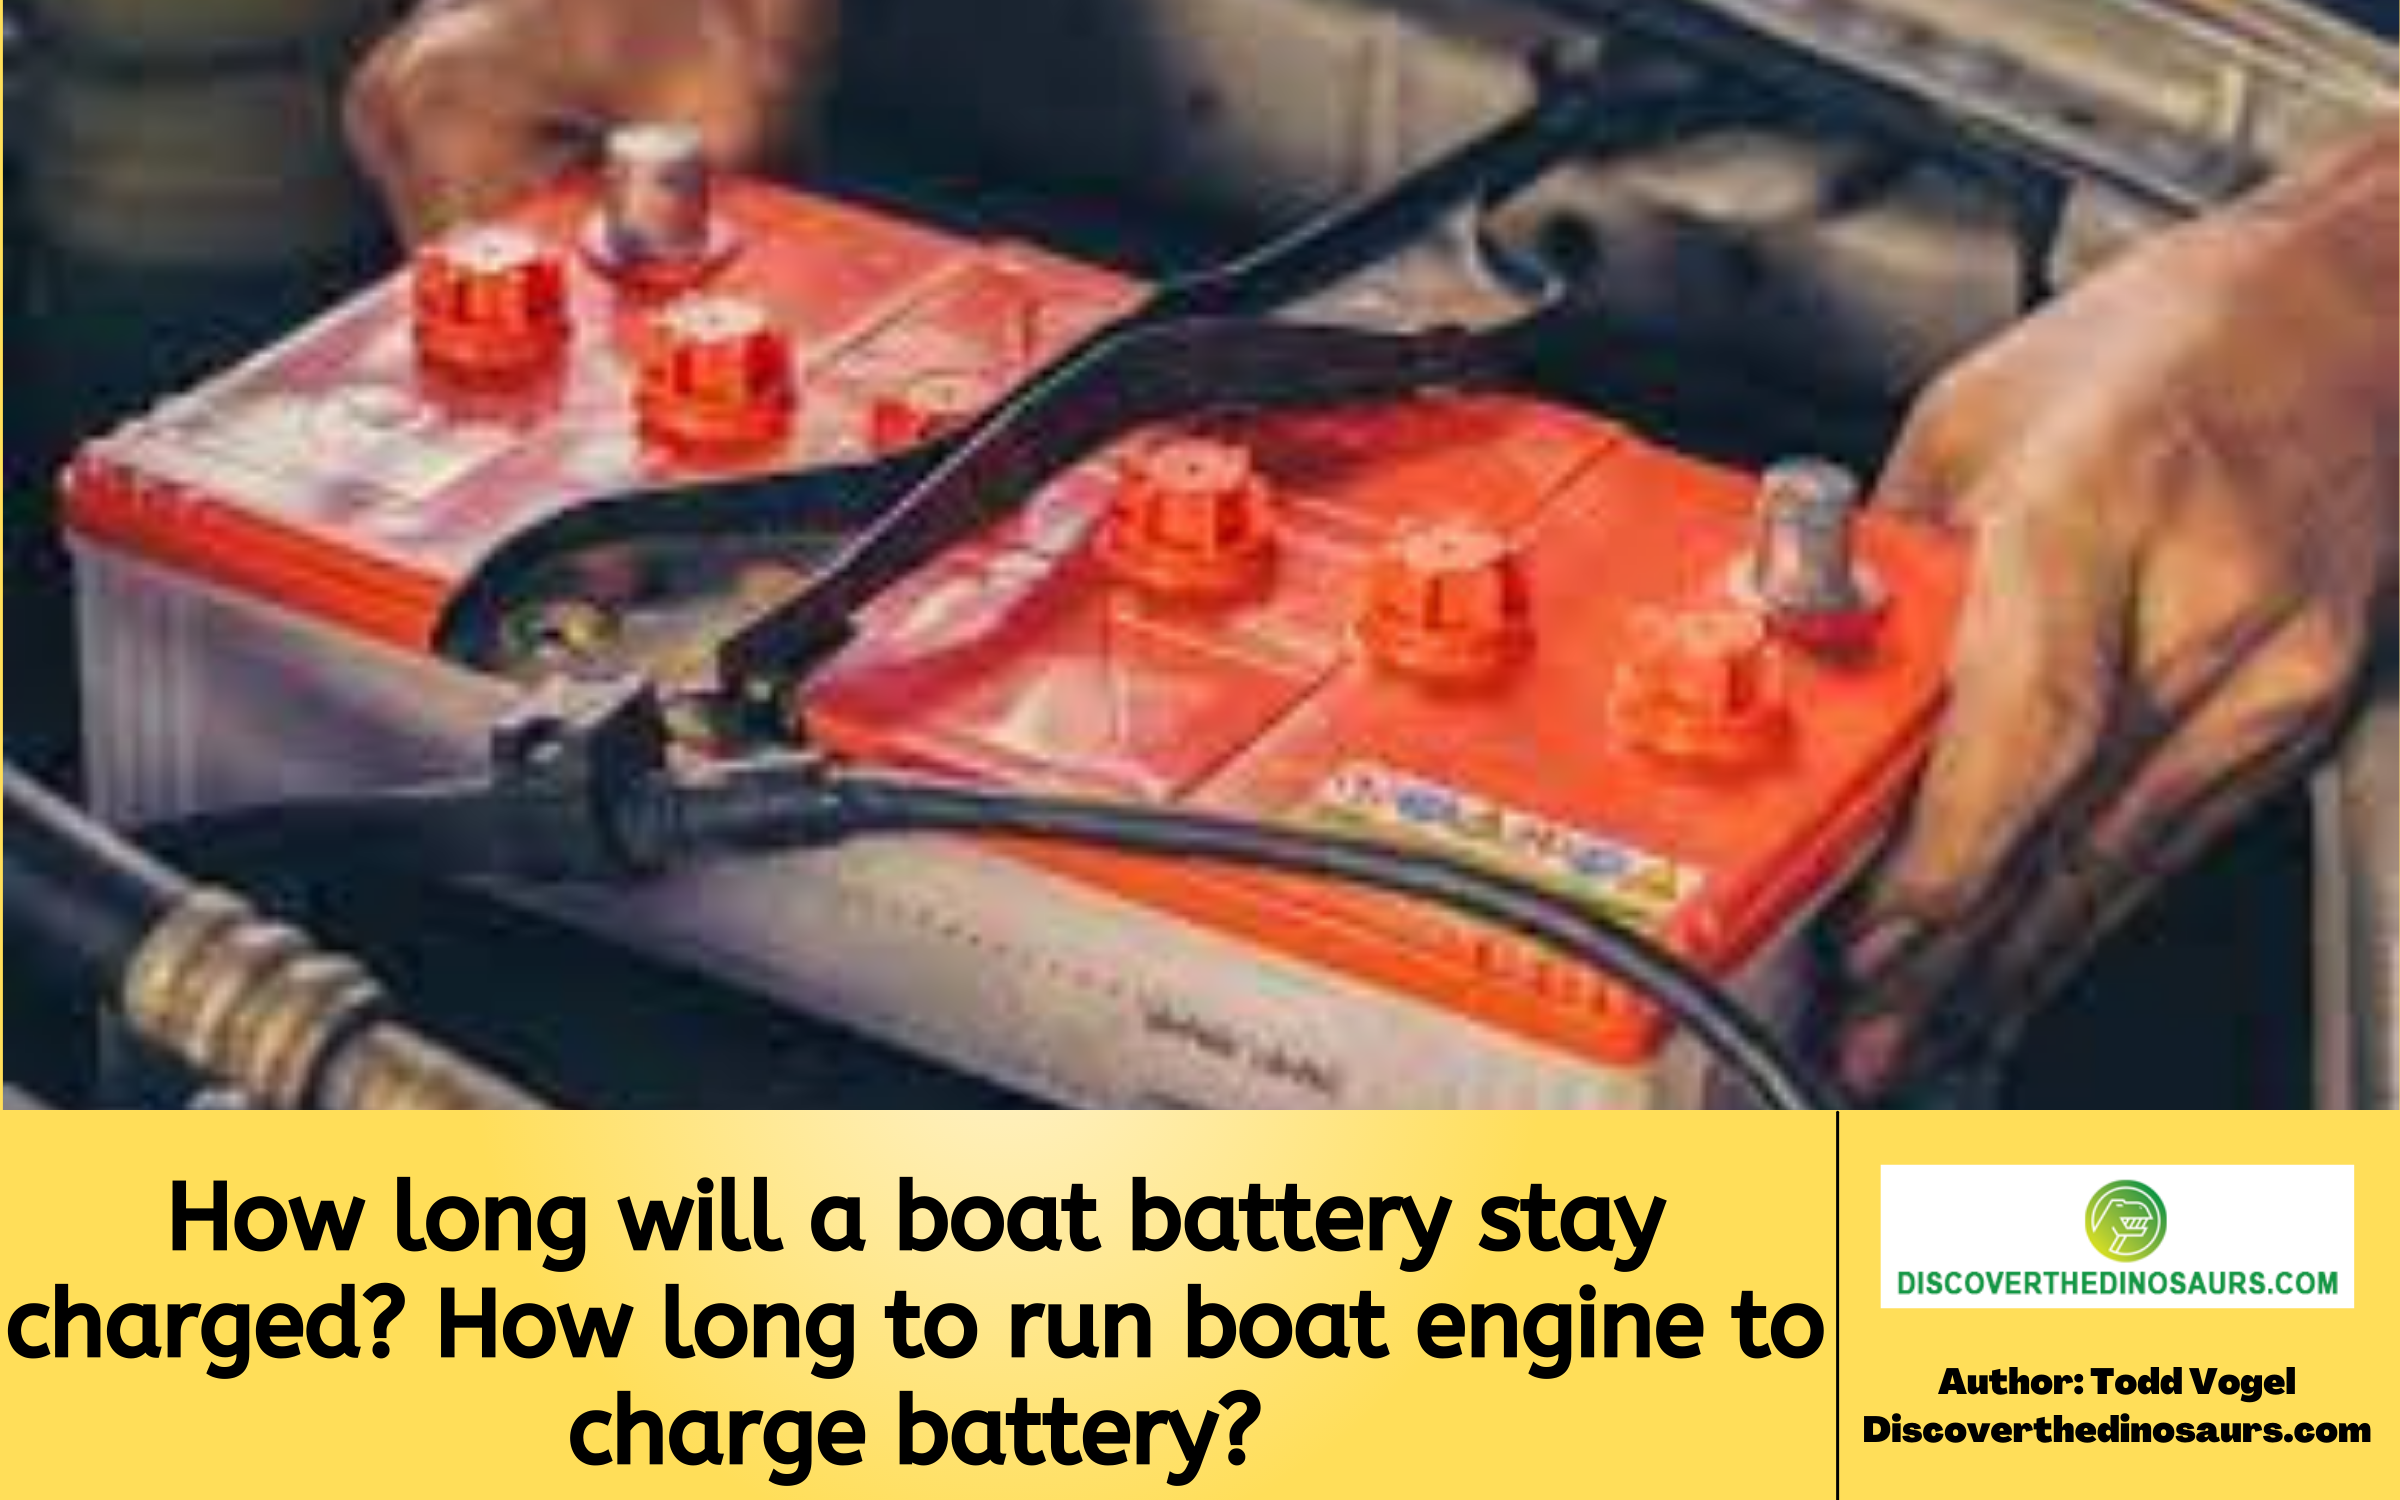 How long will a boat battery stay charged? How long to run boat engine to charge battery?